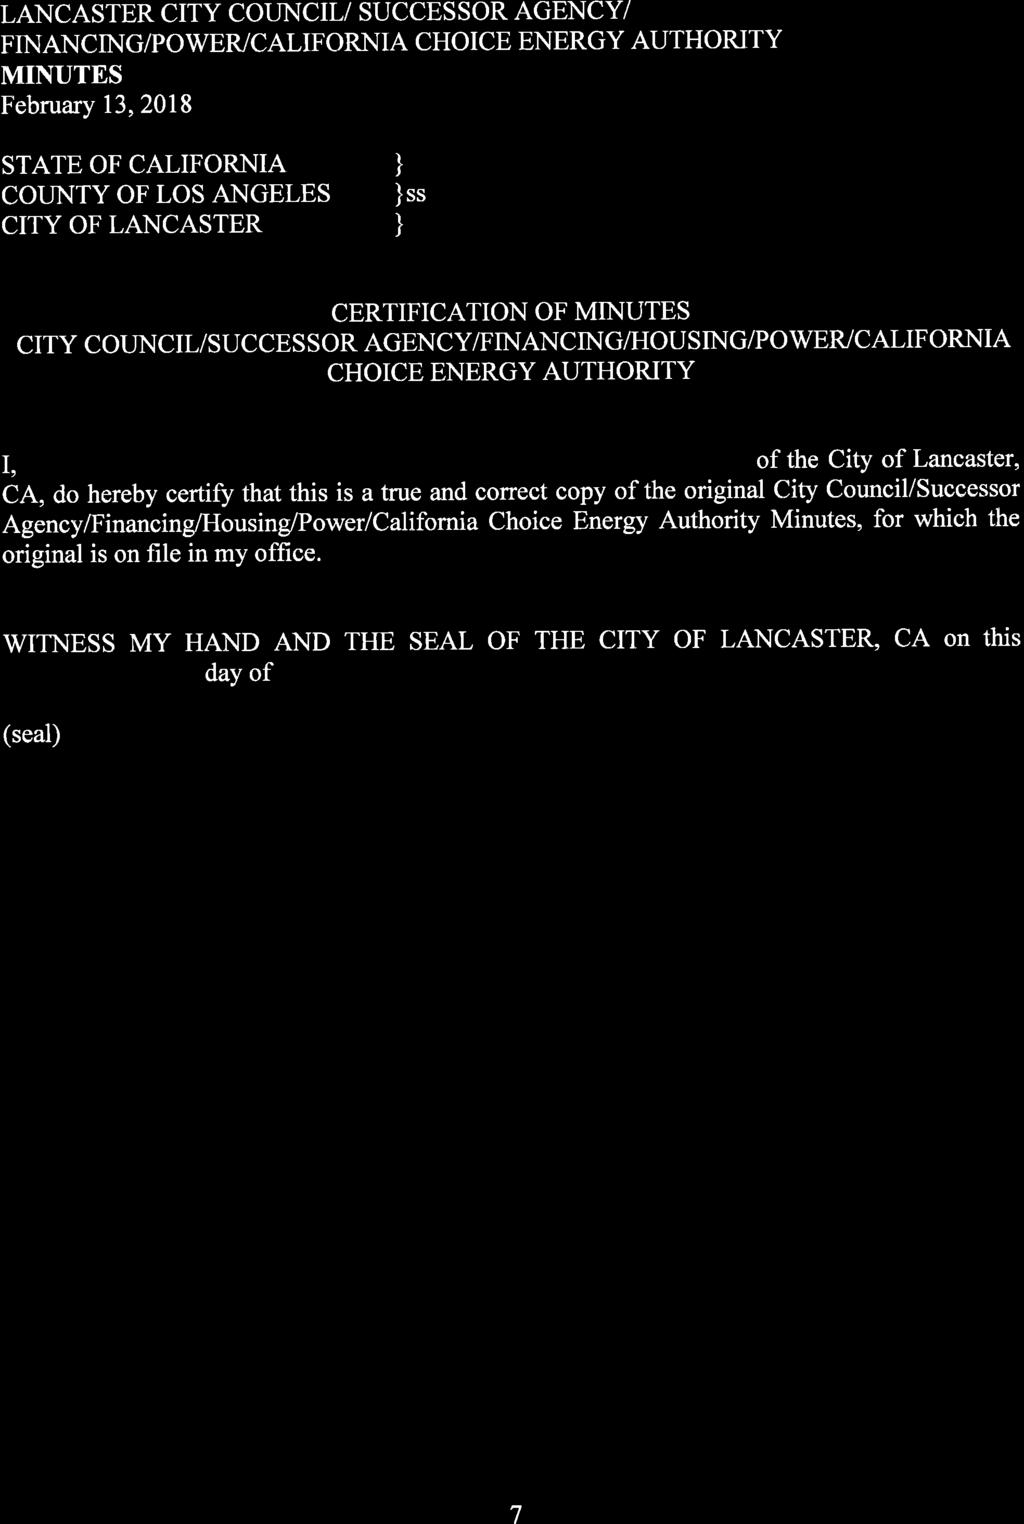 STATE OF CALIFORNIA } COUNTY OF LOS ANGELES }ss CITY OF LANCASTER } CERTIFICATION OF CITY COUNCIL/SUCCESSOR AGENCY/FINANCING/HOUSING/POWER/CALIFORNIA CHOICE ENERGY AUTHORITY I,, _ of the City of